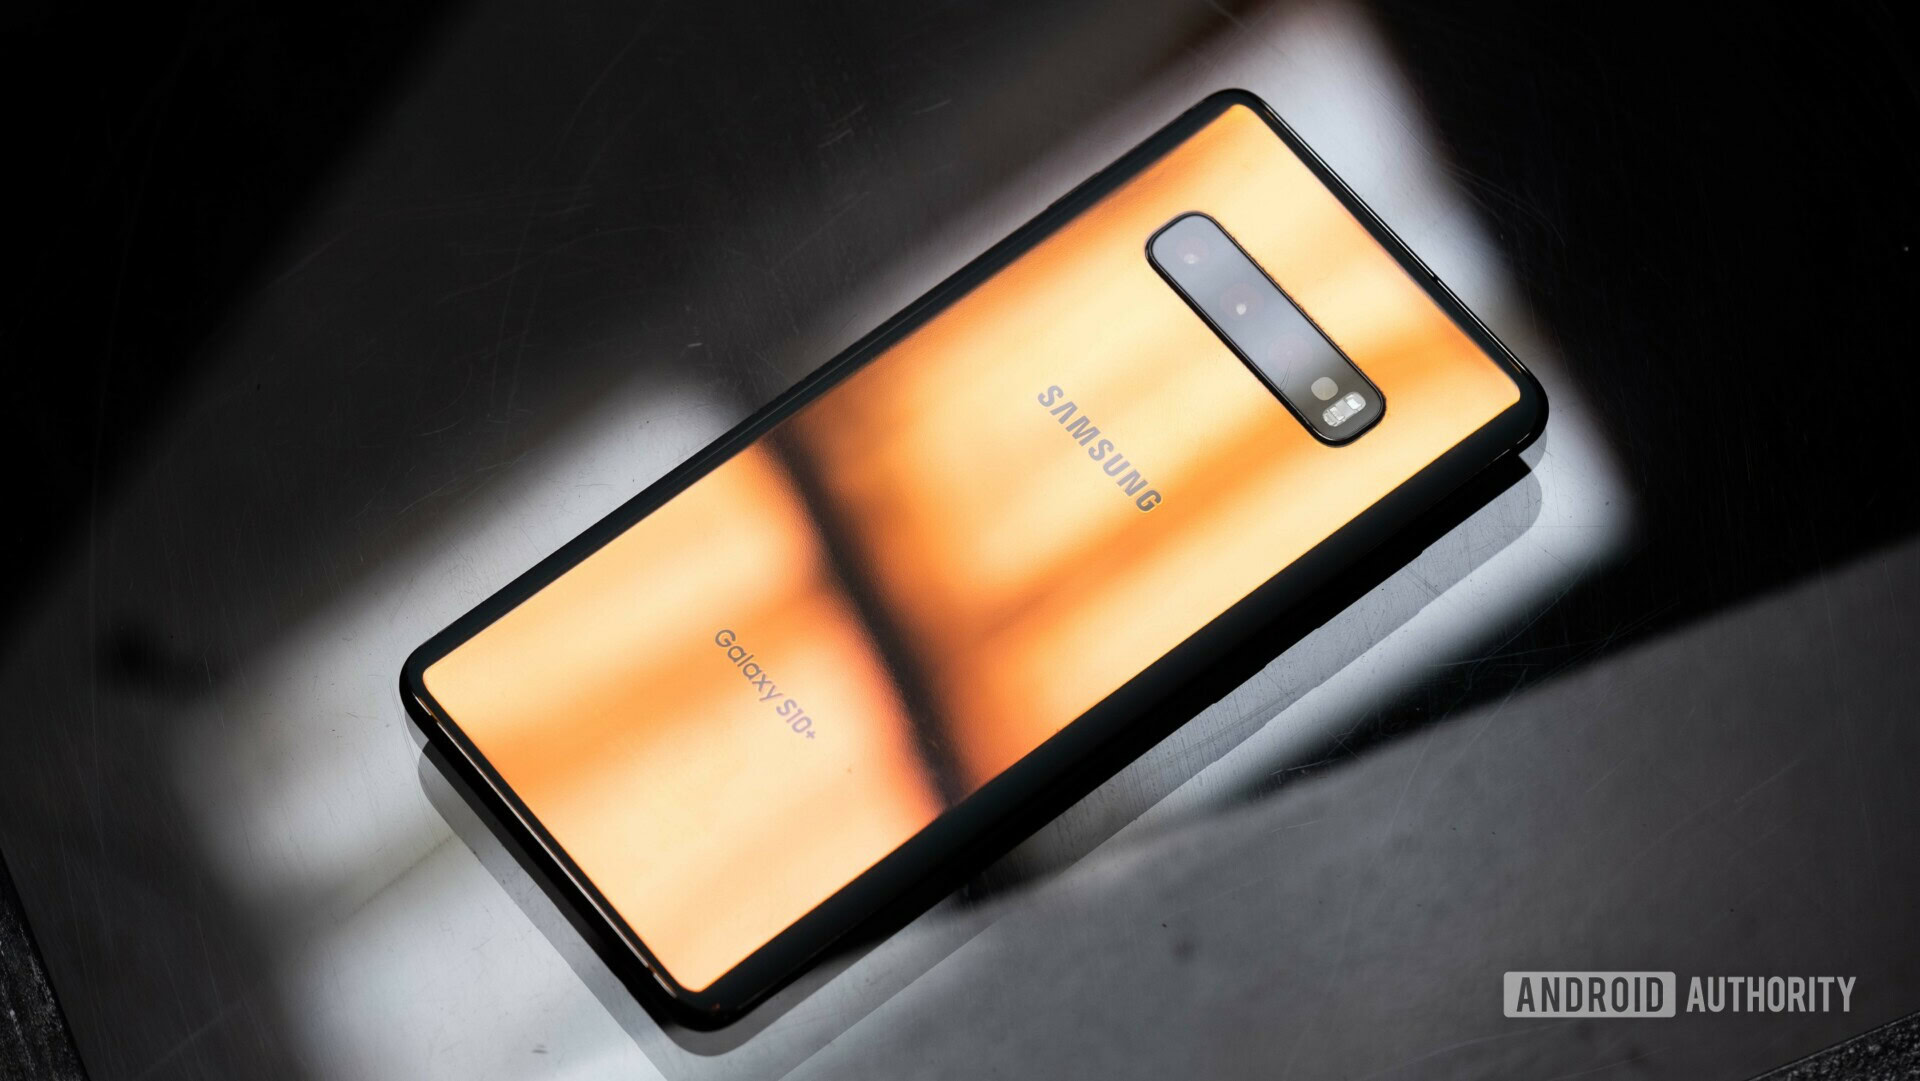 Samsung Pits Its Latest Flagship, the Galaxy S10 Plus Against Last